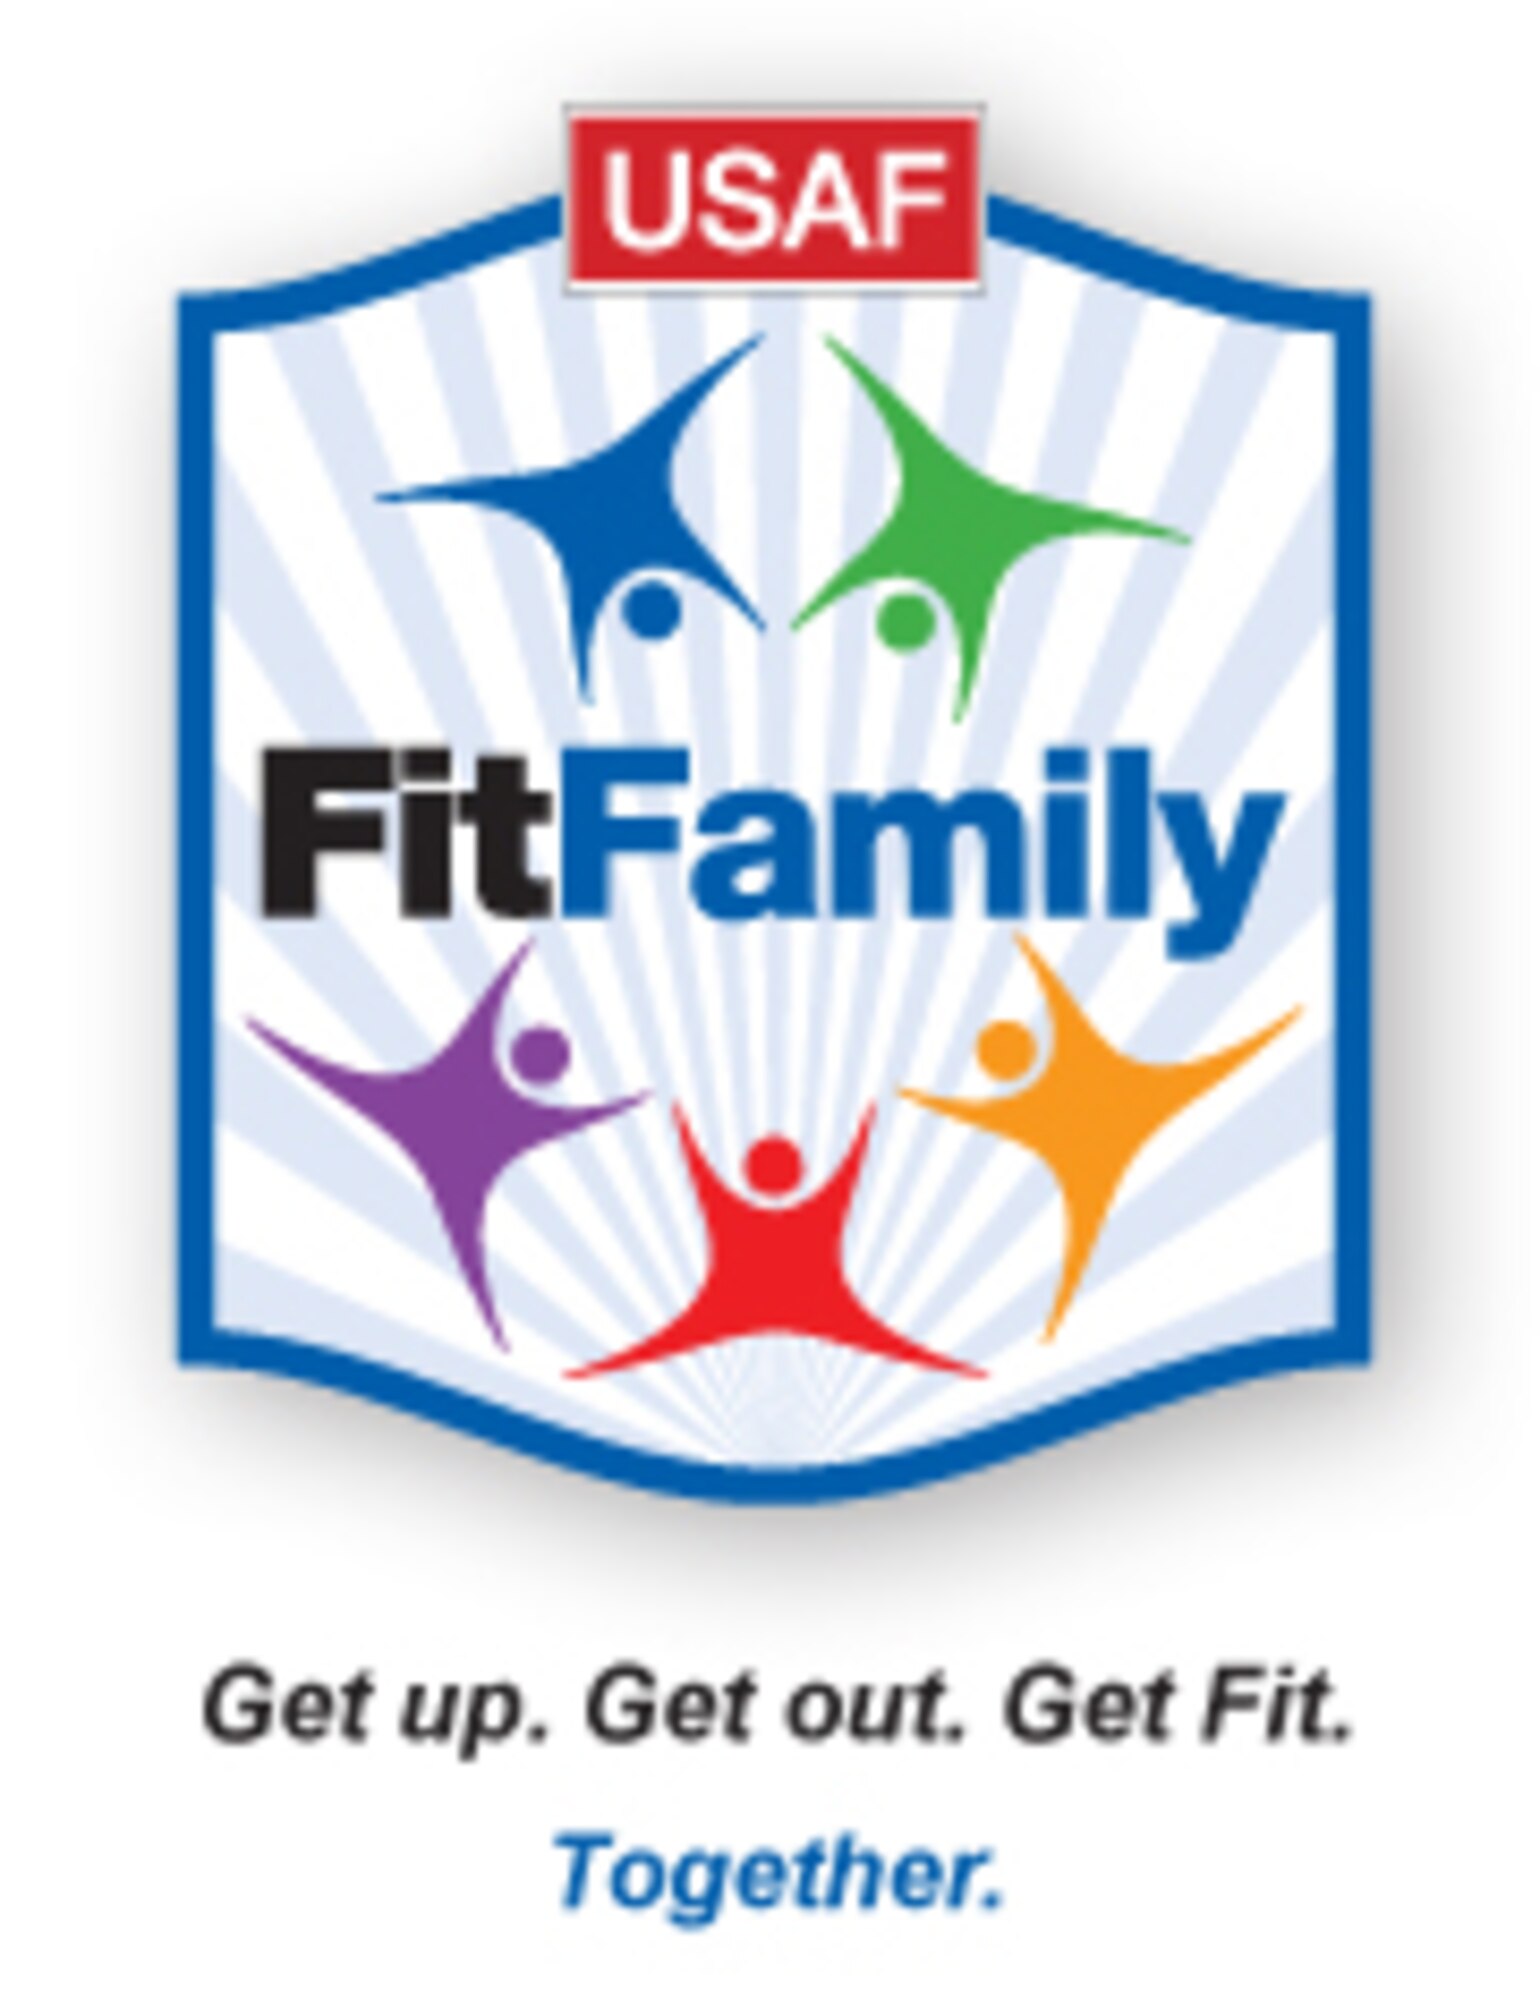 FitFamily is an Air Force program that encourages families to "get up, get out and get fit together."  (U.S. Air Force graphic)
